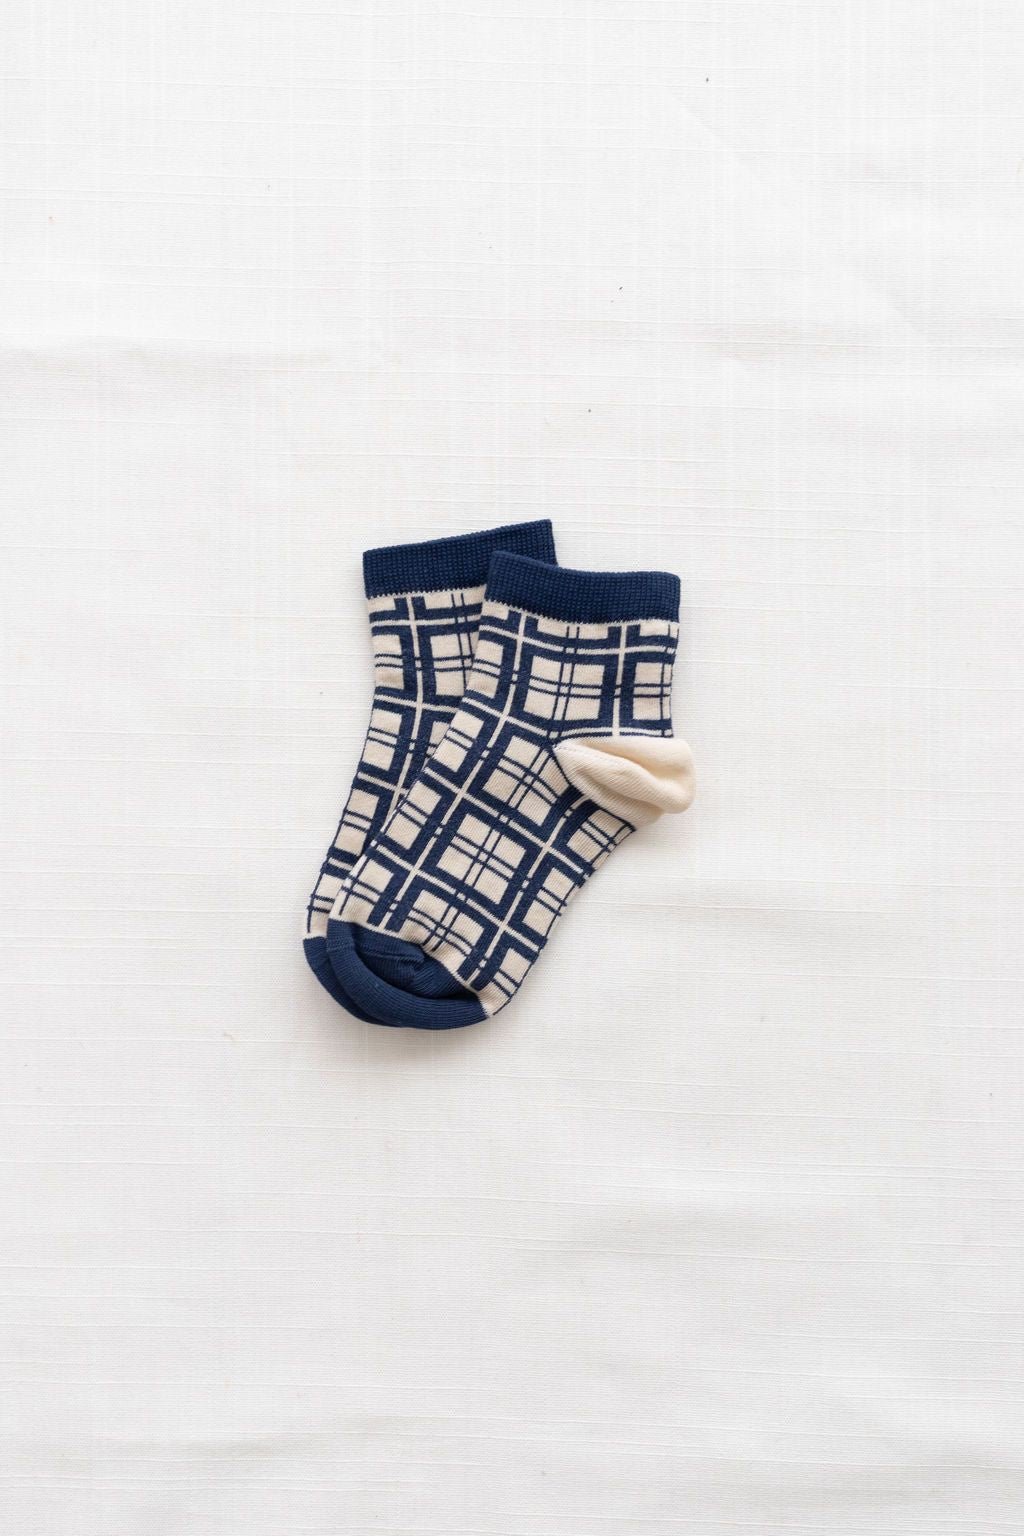 Fin & Vince - Printed Socks - French Plaid - Navy